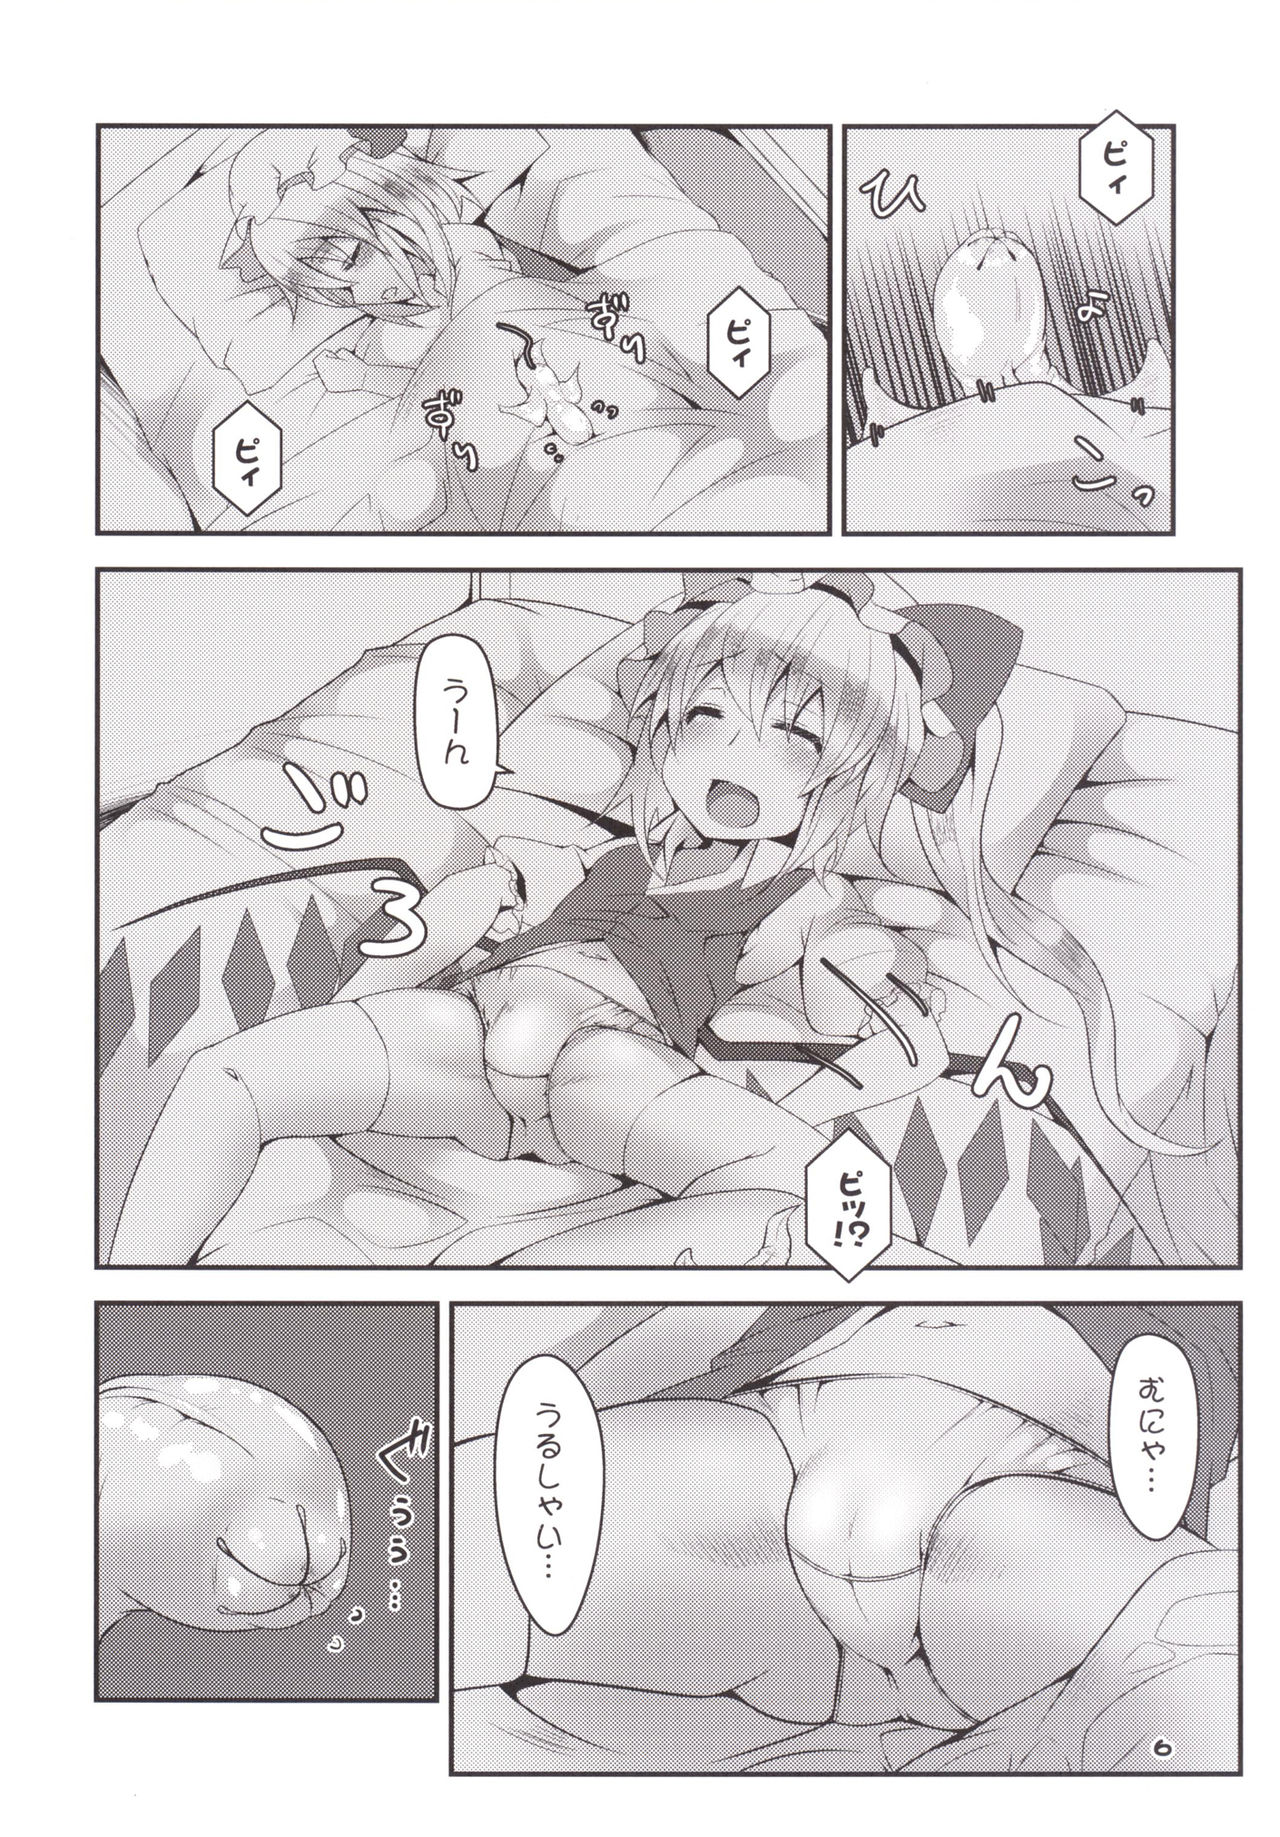 [Angelic Feather (Land Sale)] Otimpo Hunter Flandle (Touhou Project) [Digital] page 5 full